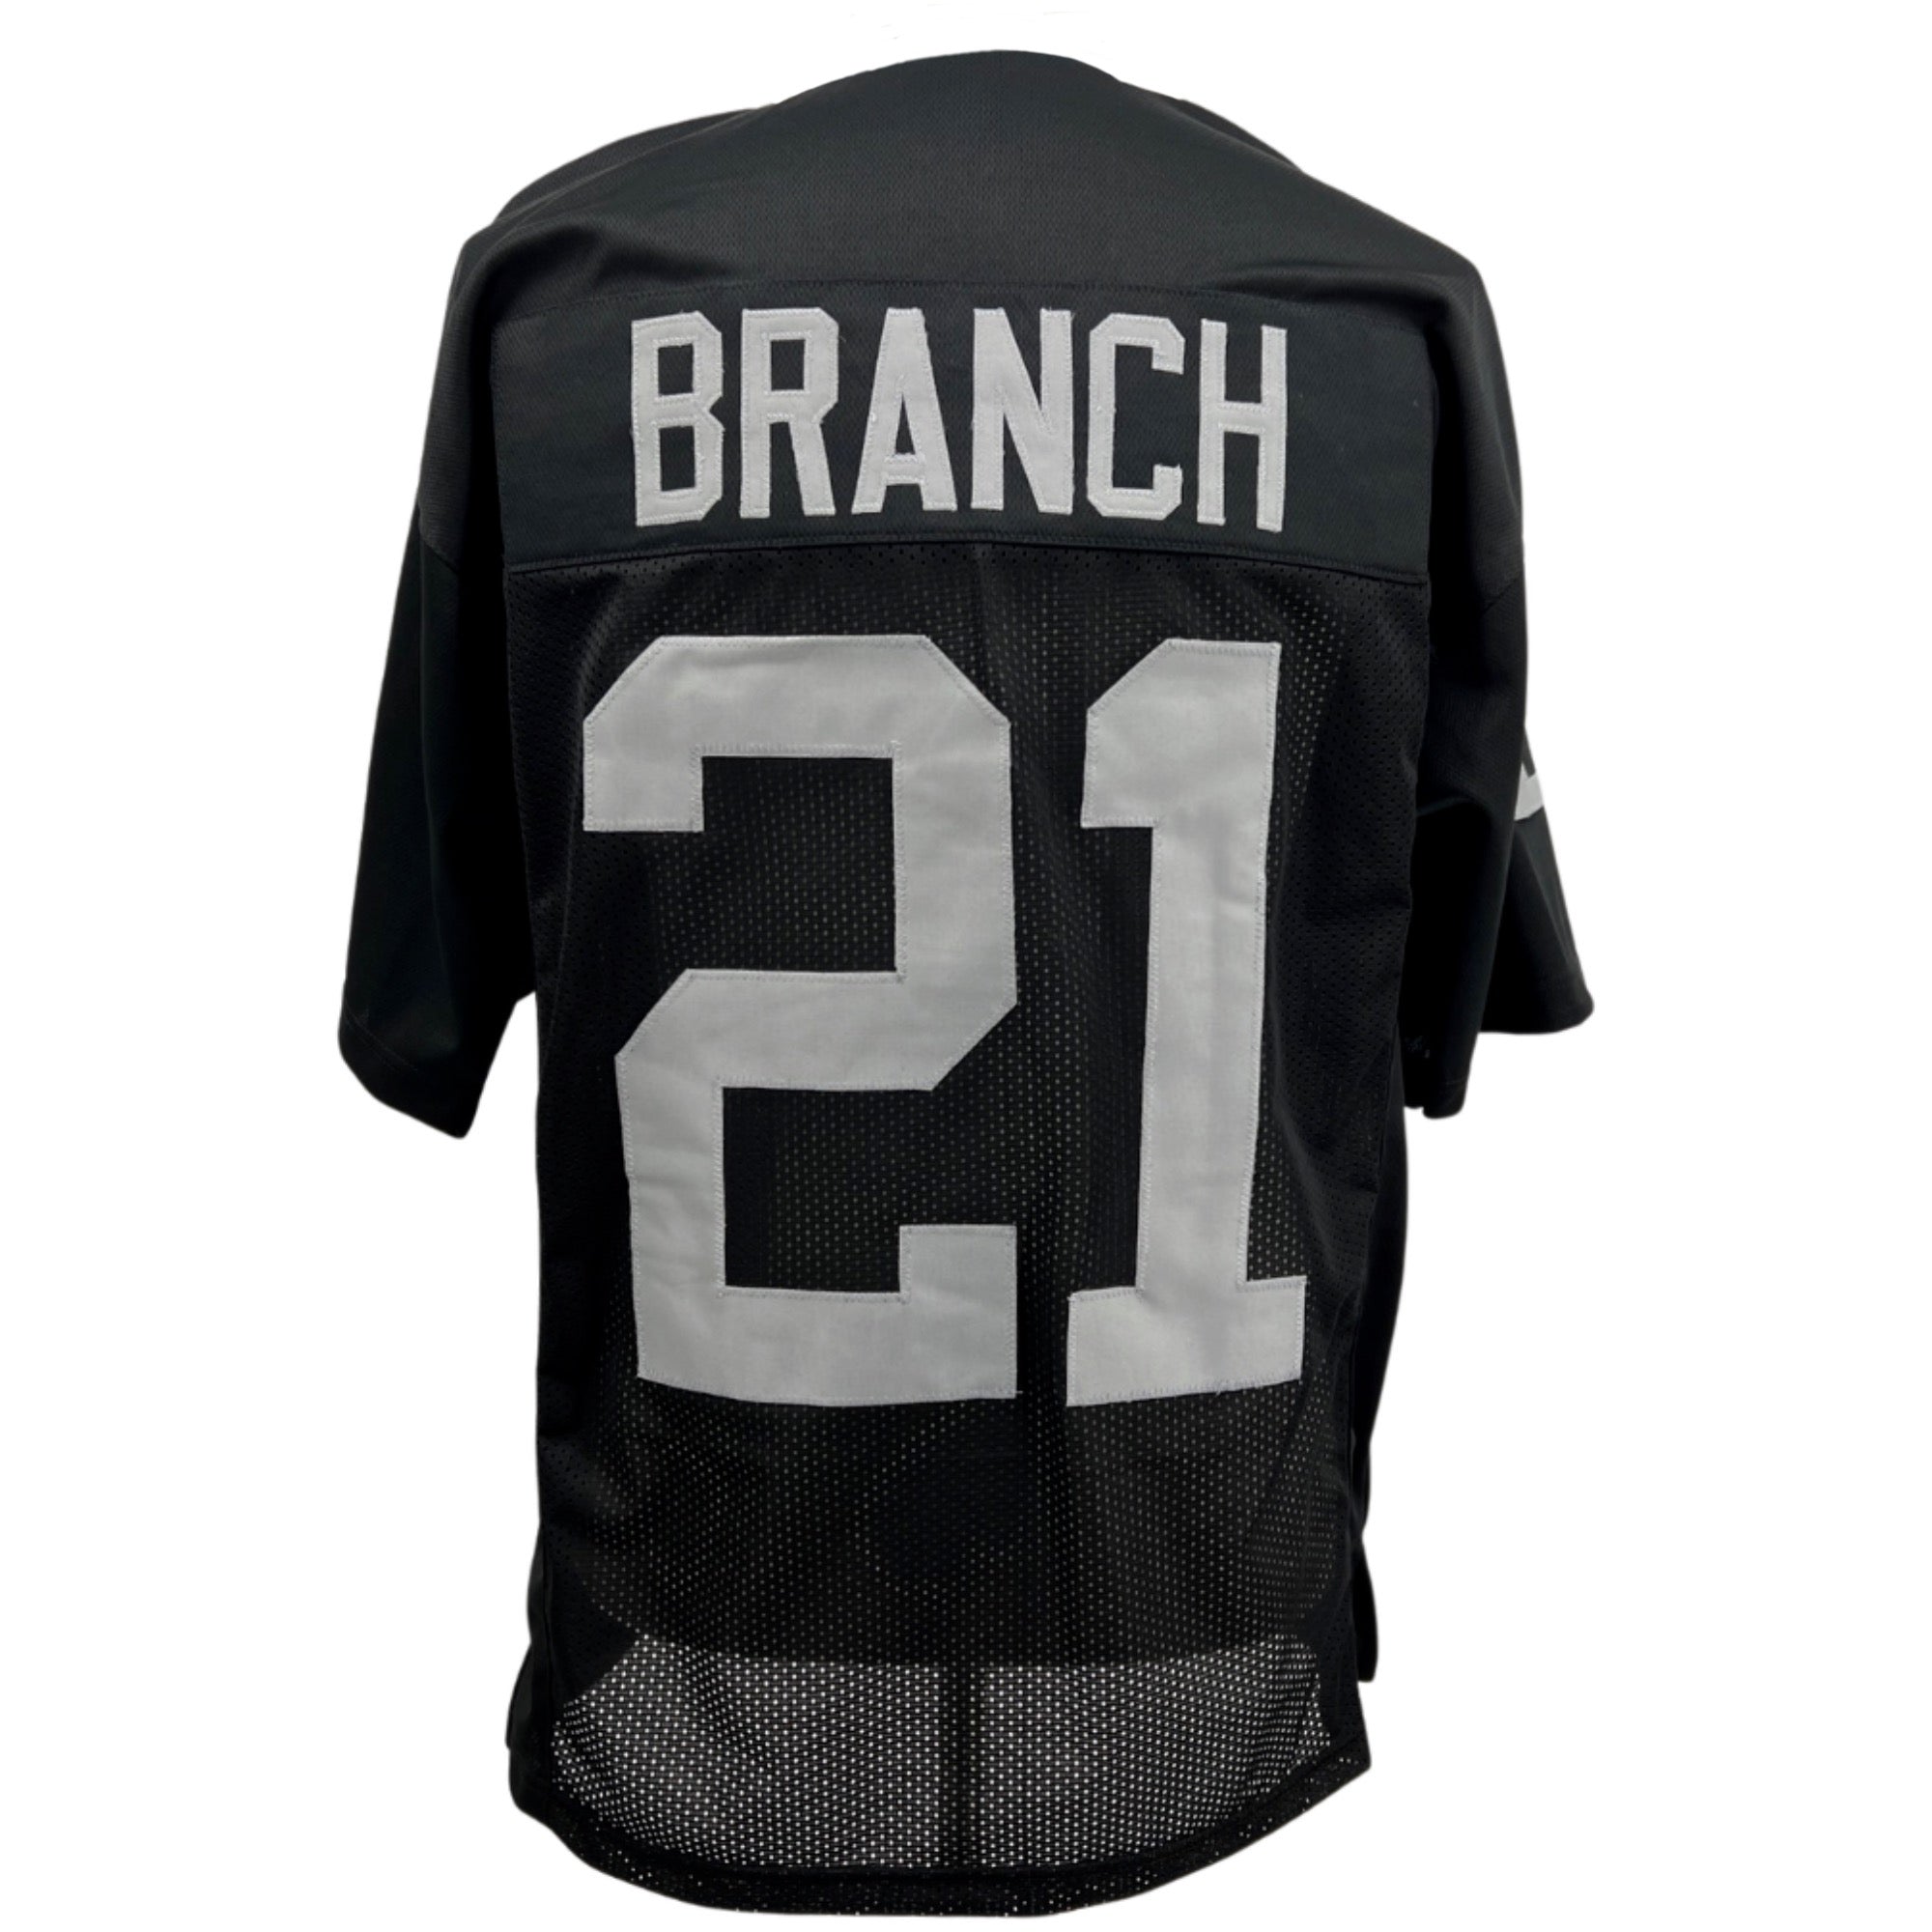 CLIFF BRANCH Oakland Raiders BLACK Jersey M-5XL Unsigned Custom Sewn Stitched